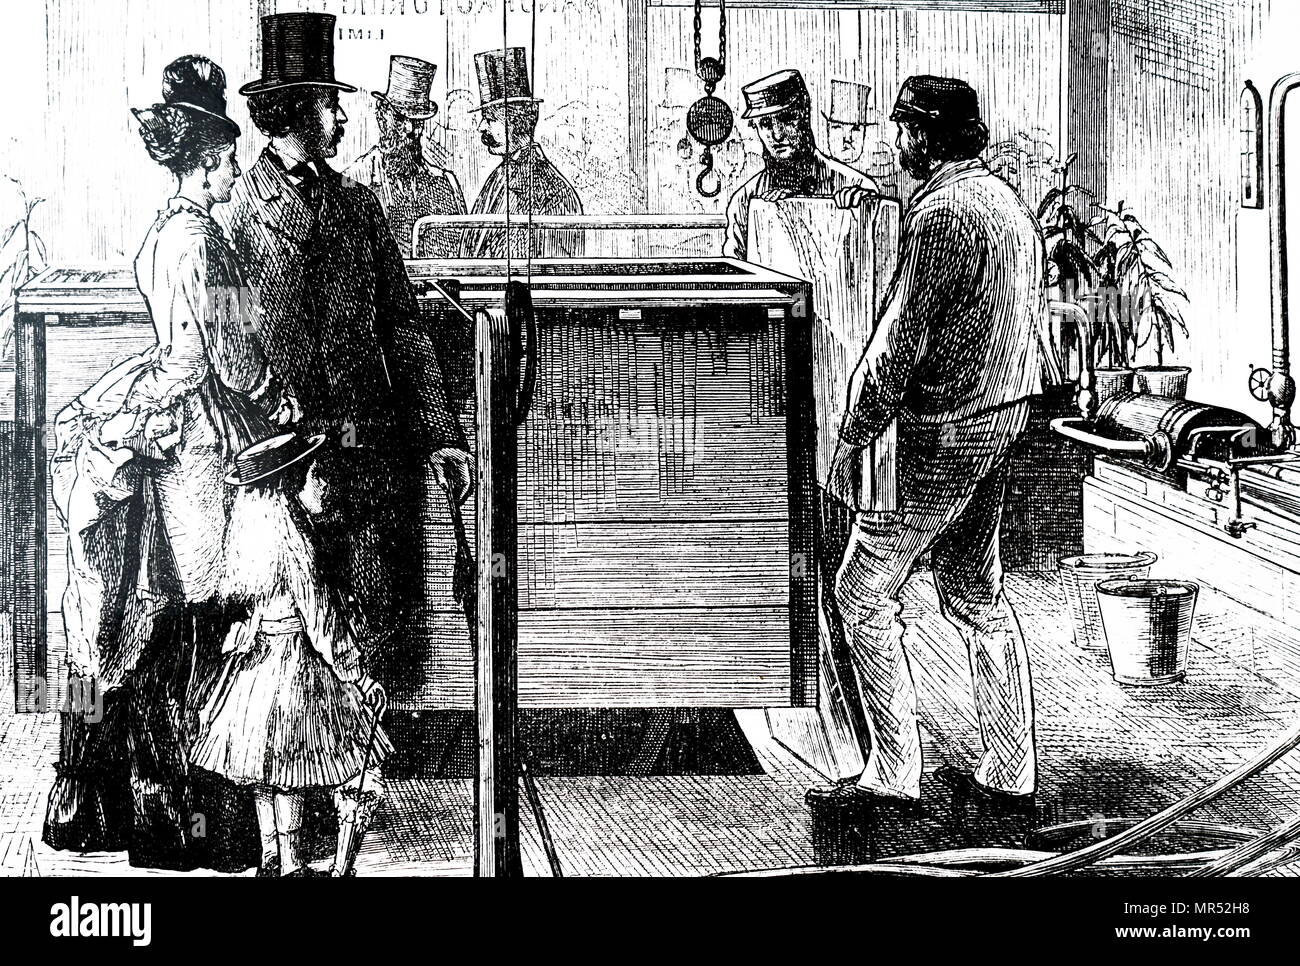 Illustration depicting Siebe, West & Co's machinery in use at the Ice Manufacturing Company's Works, Queen Victoria Street, London. Dated 19th century Stock Photo